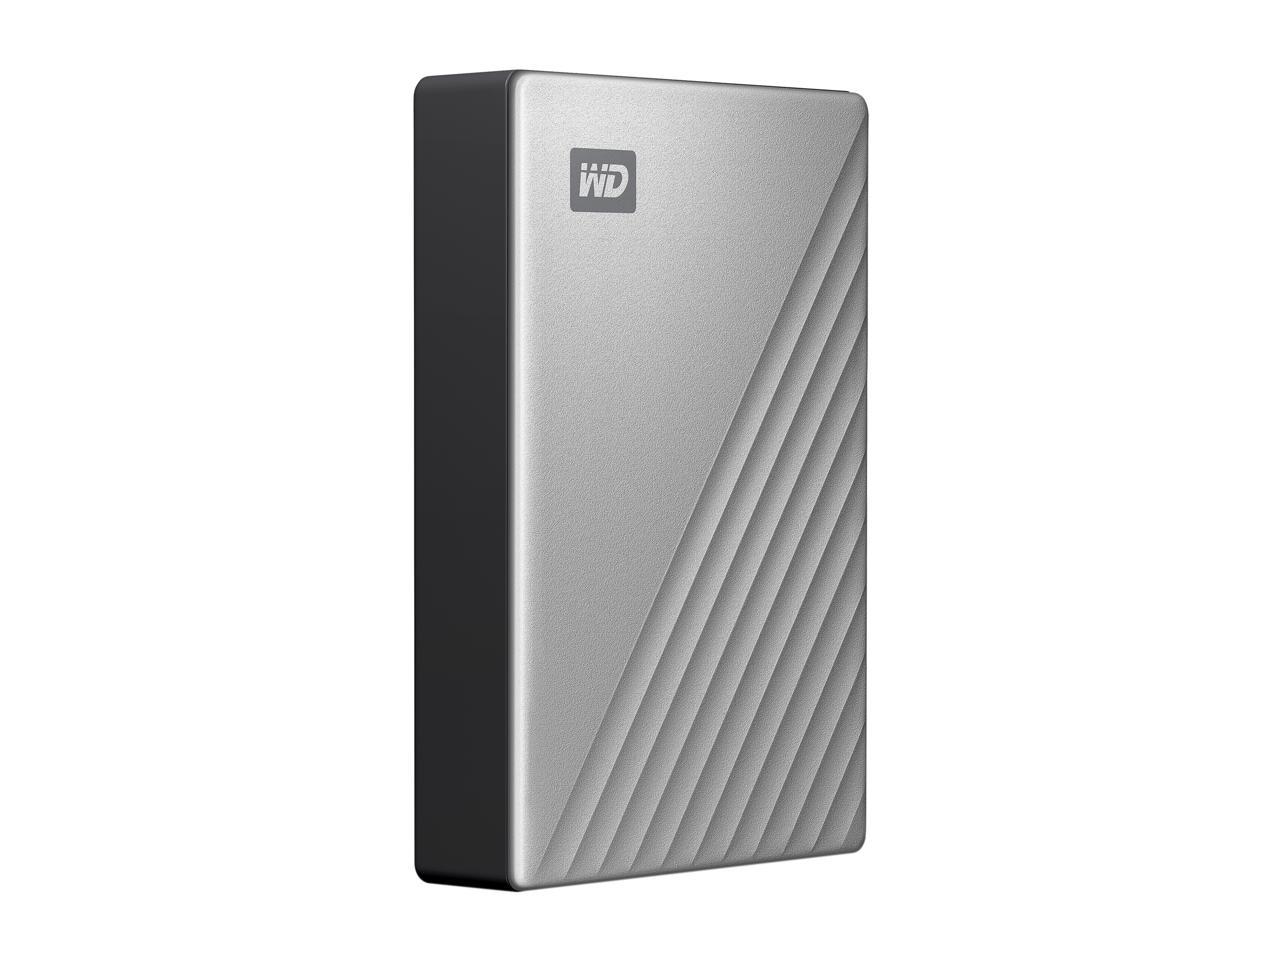 format for mac and windows my passport wd external hard drive